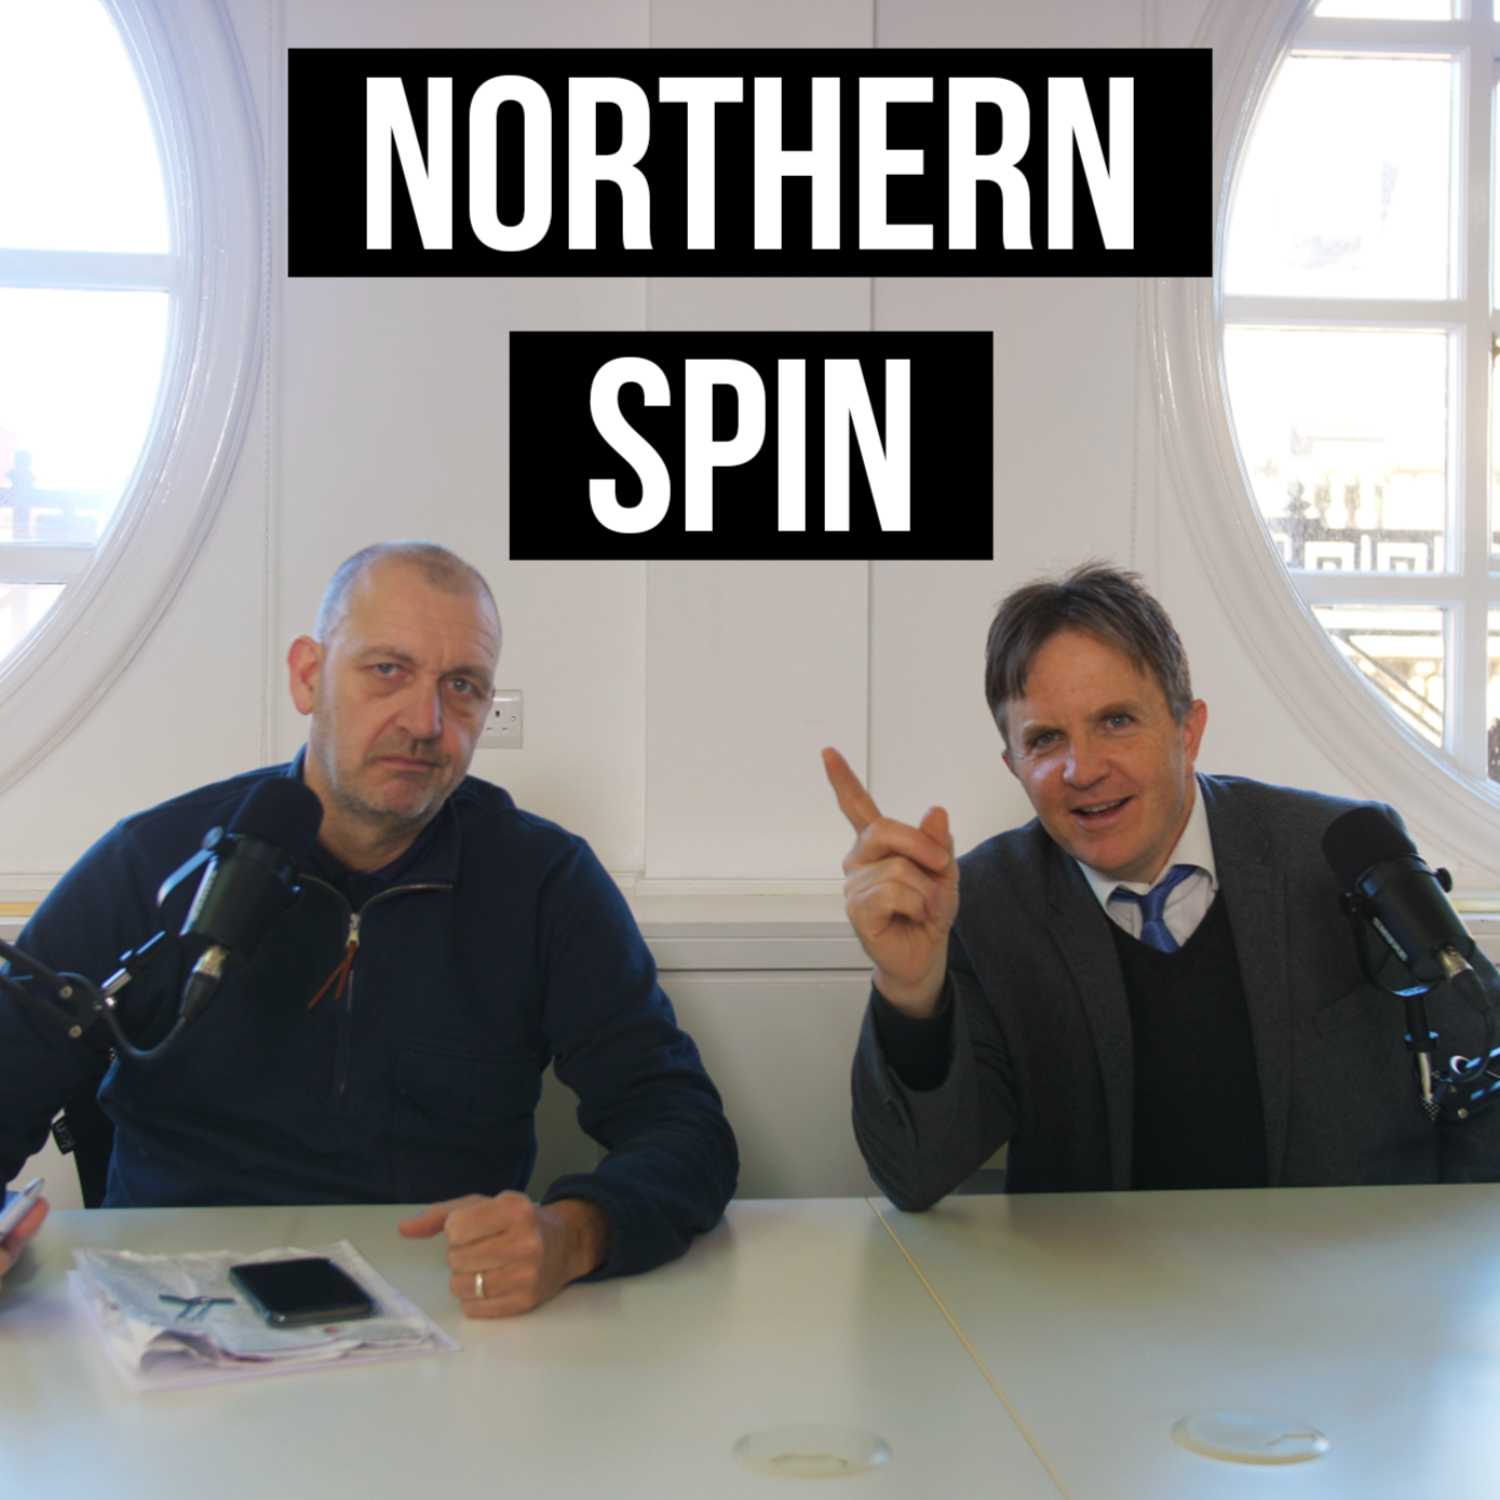 Northern Spin - Season 5 - Episode 8: Is the BBC Biased?